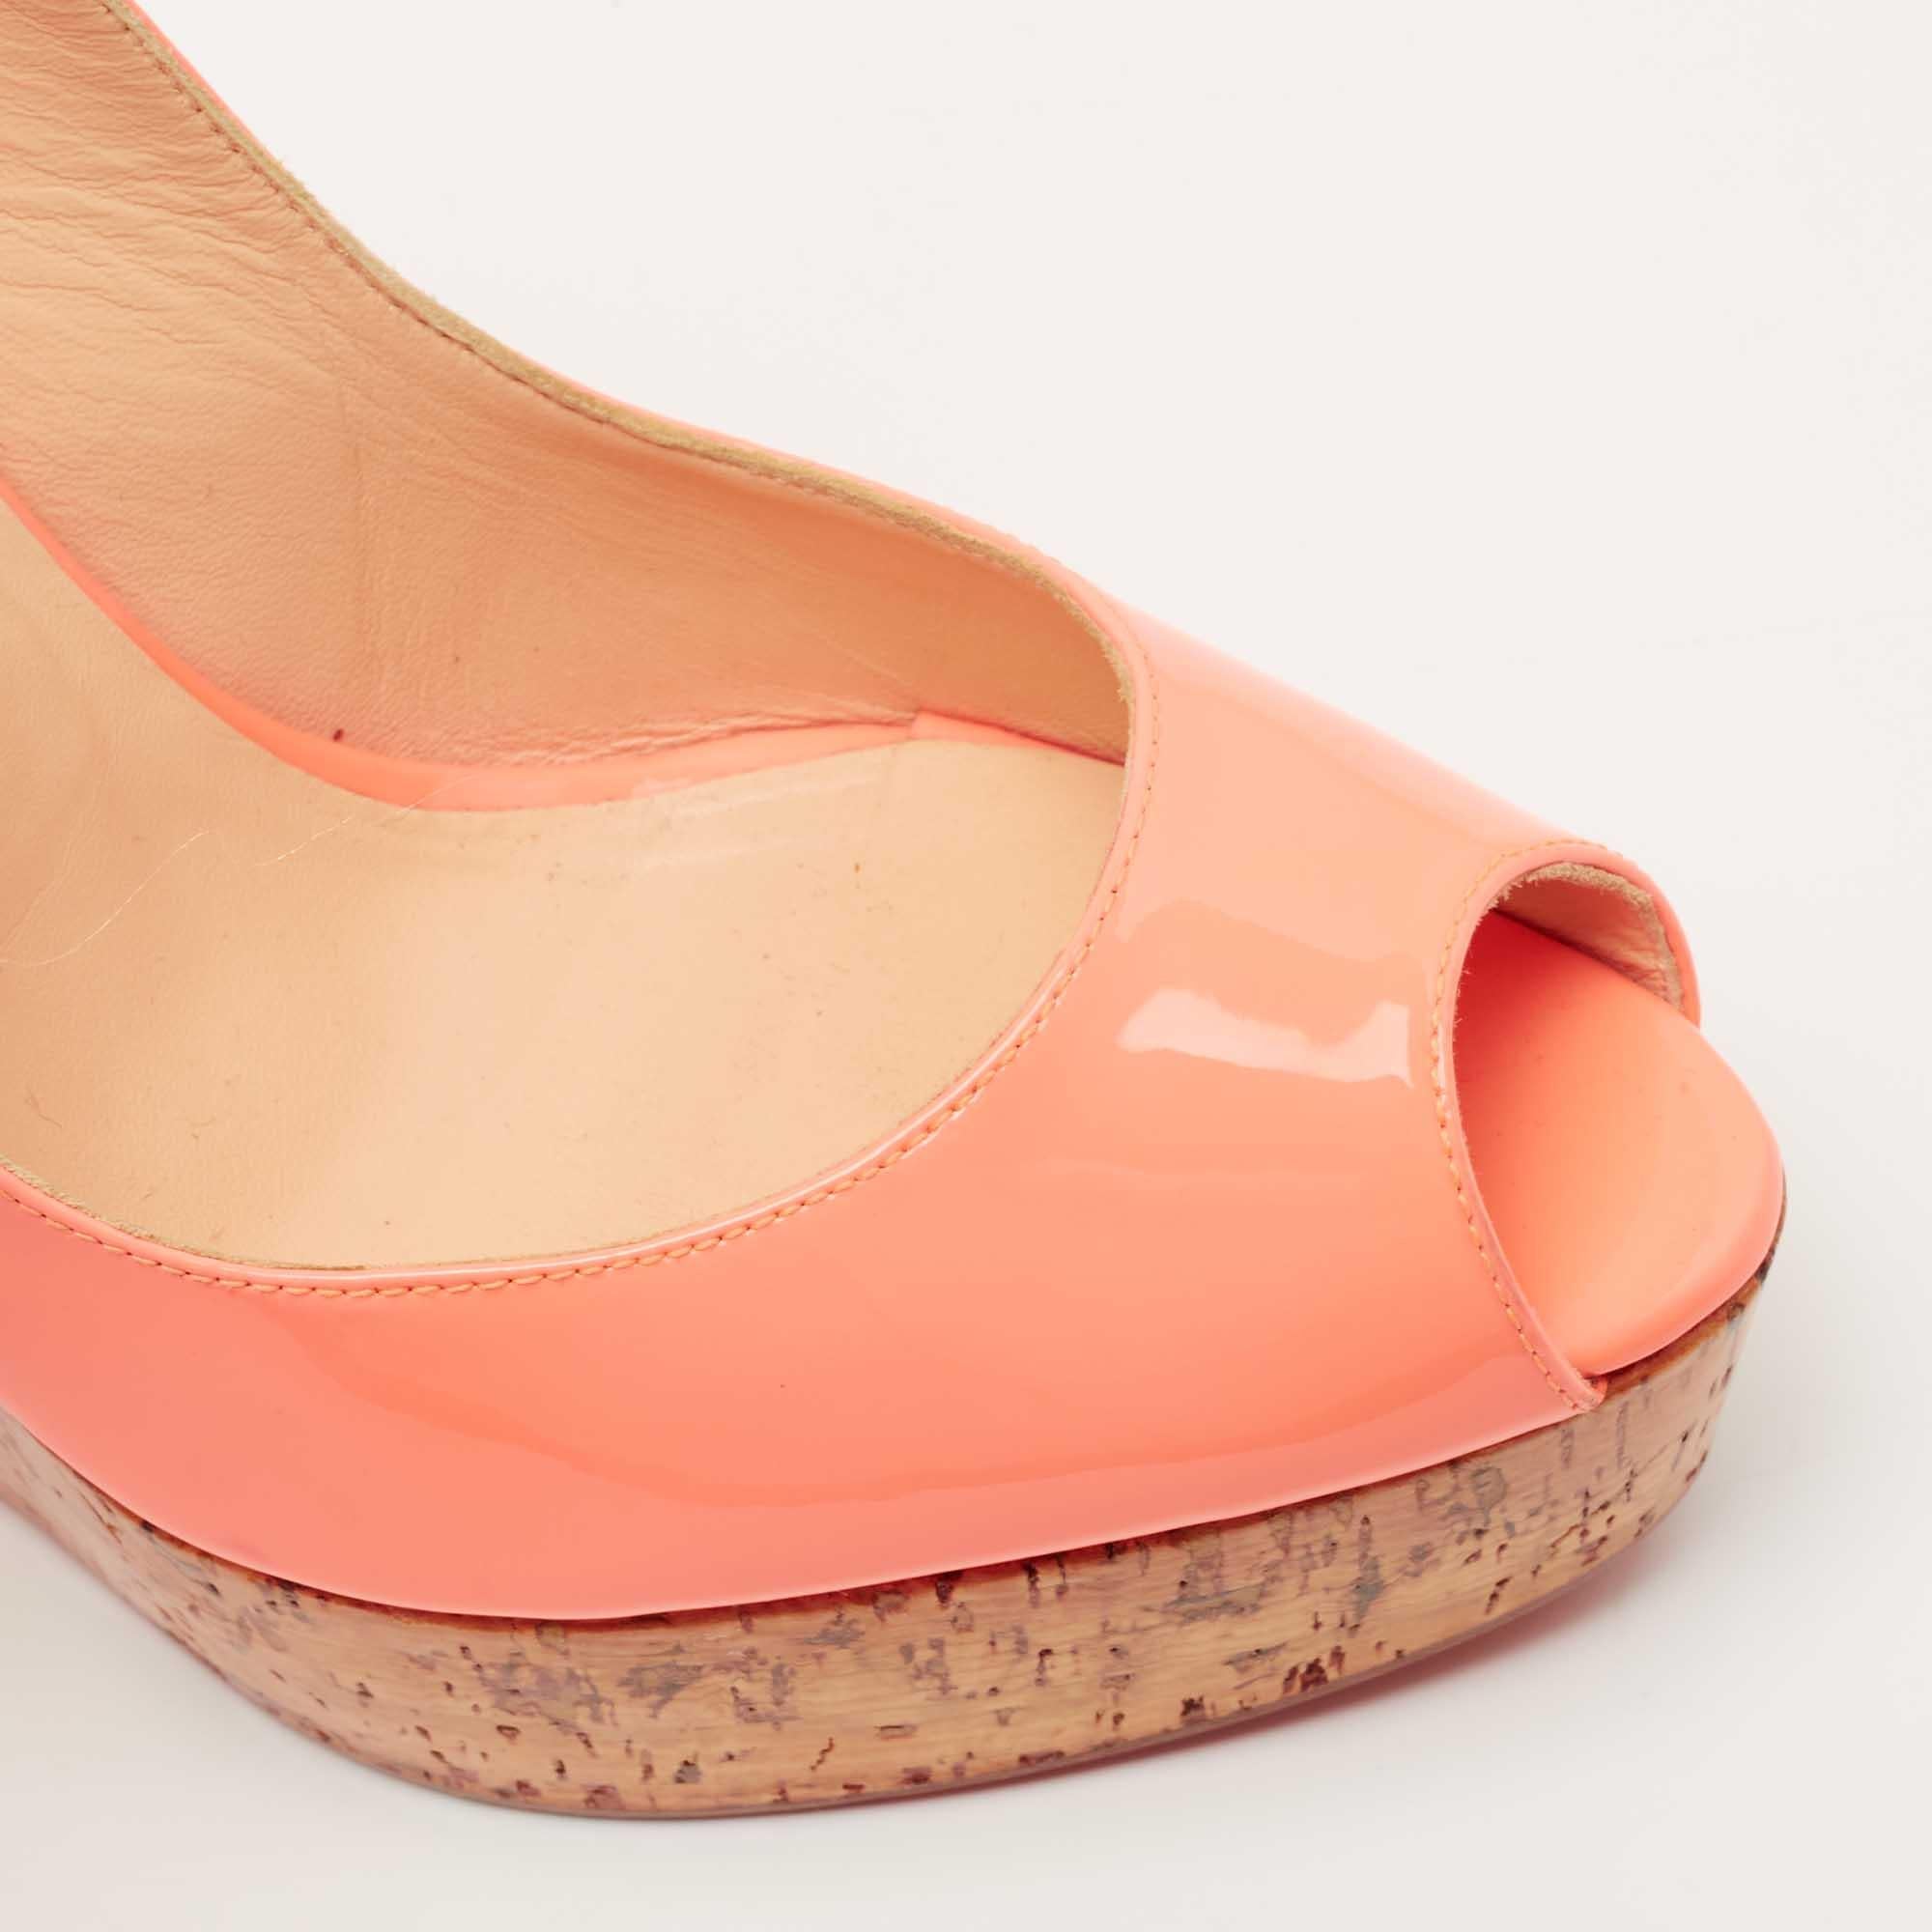 Christian Louboutin Peach Patent Leather Une Plume Wedge Sandals Size 40.5 For Sale 2